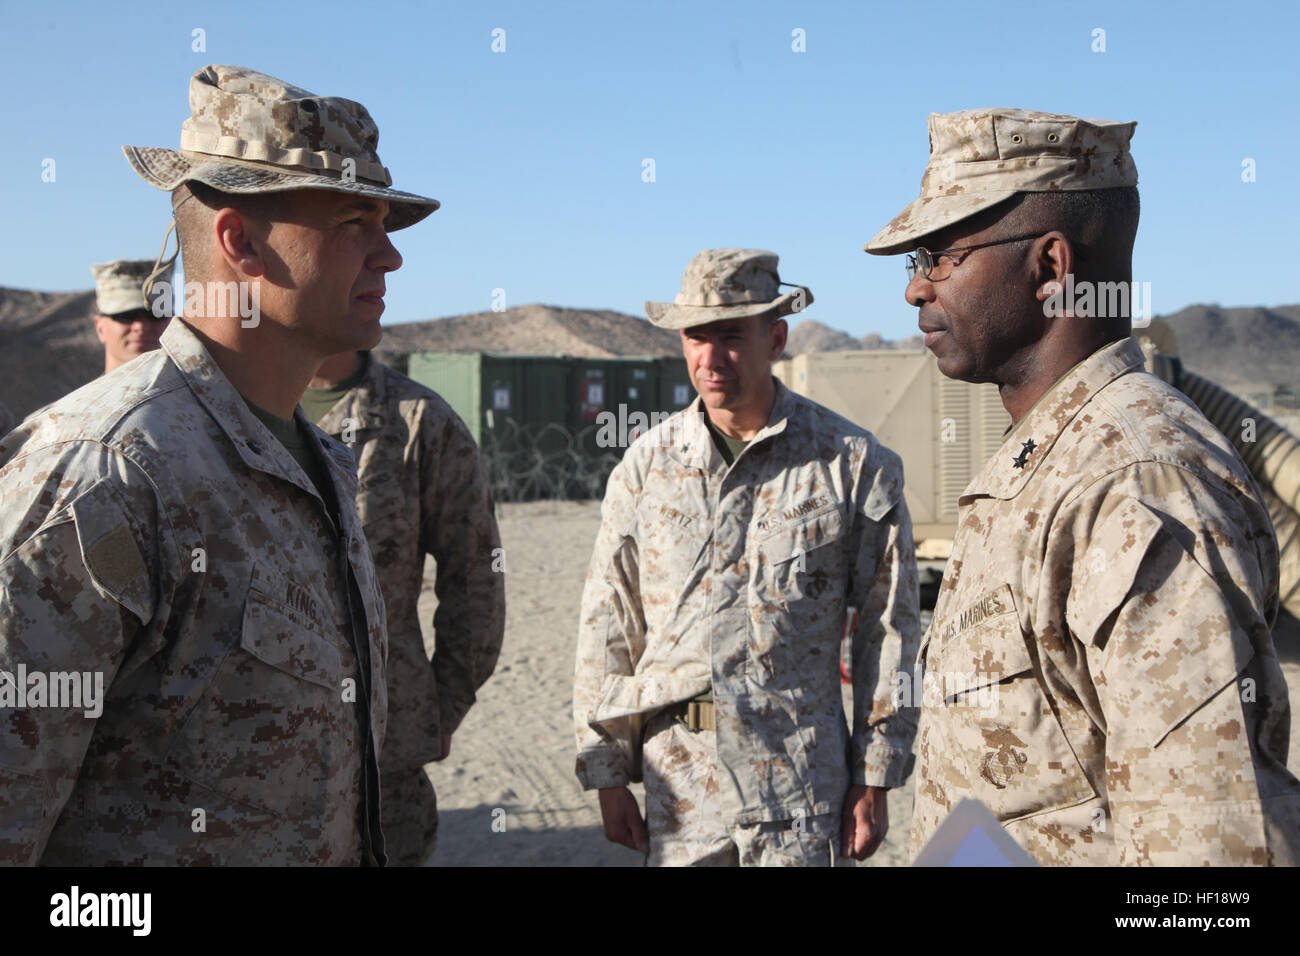 U.S. Marine Corps Lt. Col James King, left, senior watch officer, 1st Marine Division (1ST MARDIV), stands before Maj. Gen. Ronald L. Bailey, commanding general, 1ST MARDIV at his promotion ceremony during Exercise DESERT SCIMITAR aboard Marine Corps Air Ground Combat Center Twentynine Palms, Calif., May 1, 2013. Bailey took the opportunity to promote King as he conducted a battlefield circulation during the division exercise. (U.S. Marine Corps Photo by Lance Cpl. Ismael E. Ortega, 1st Marine Division Combat Camera / Released) DESERT SCIMITAR 130501-M-RD023-023 Stock Photo